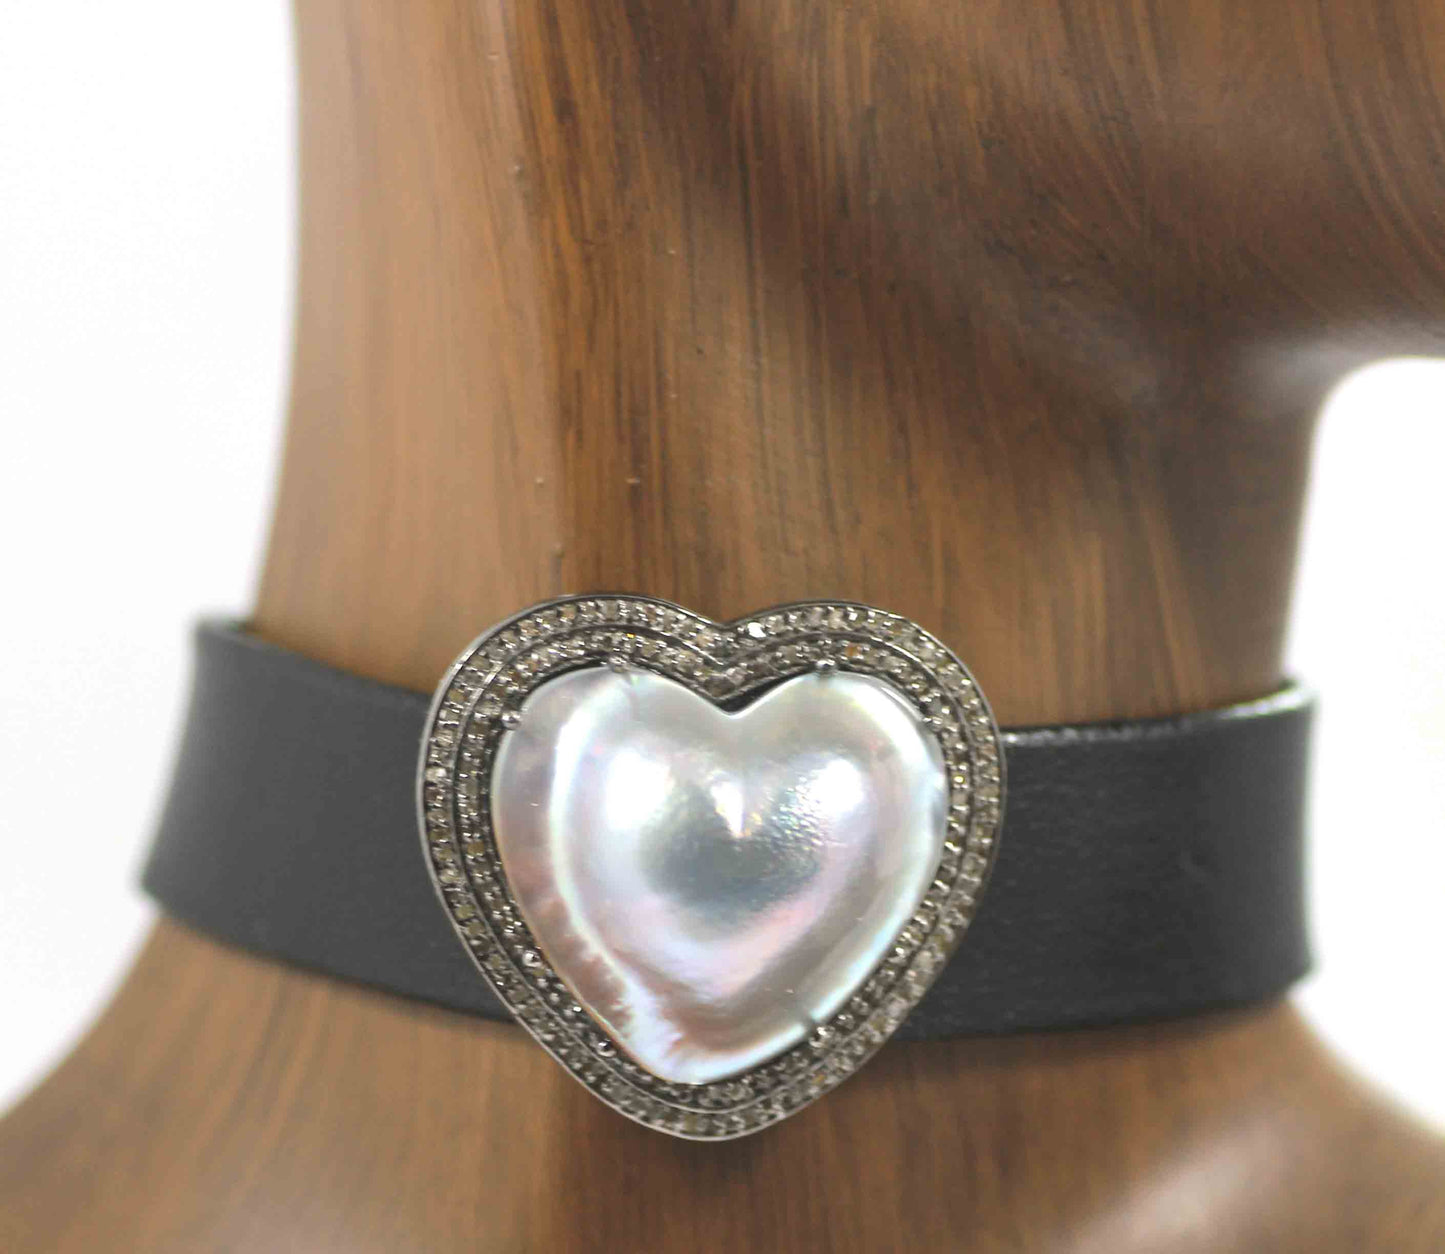 Heart Shape Leather Choker Necklaces With Pave Diamond. 925 Oxidized Sterling Silver Diamond necklaces, Genuine handmade pave diamond necklaces.